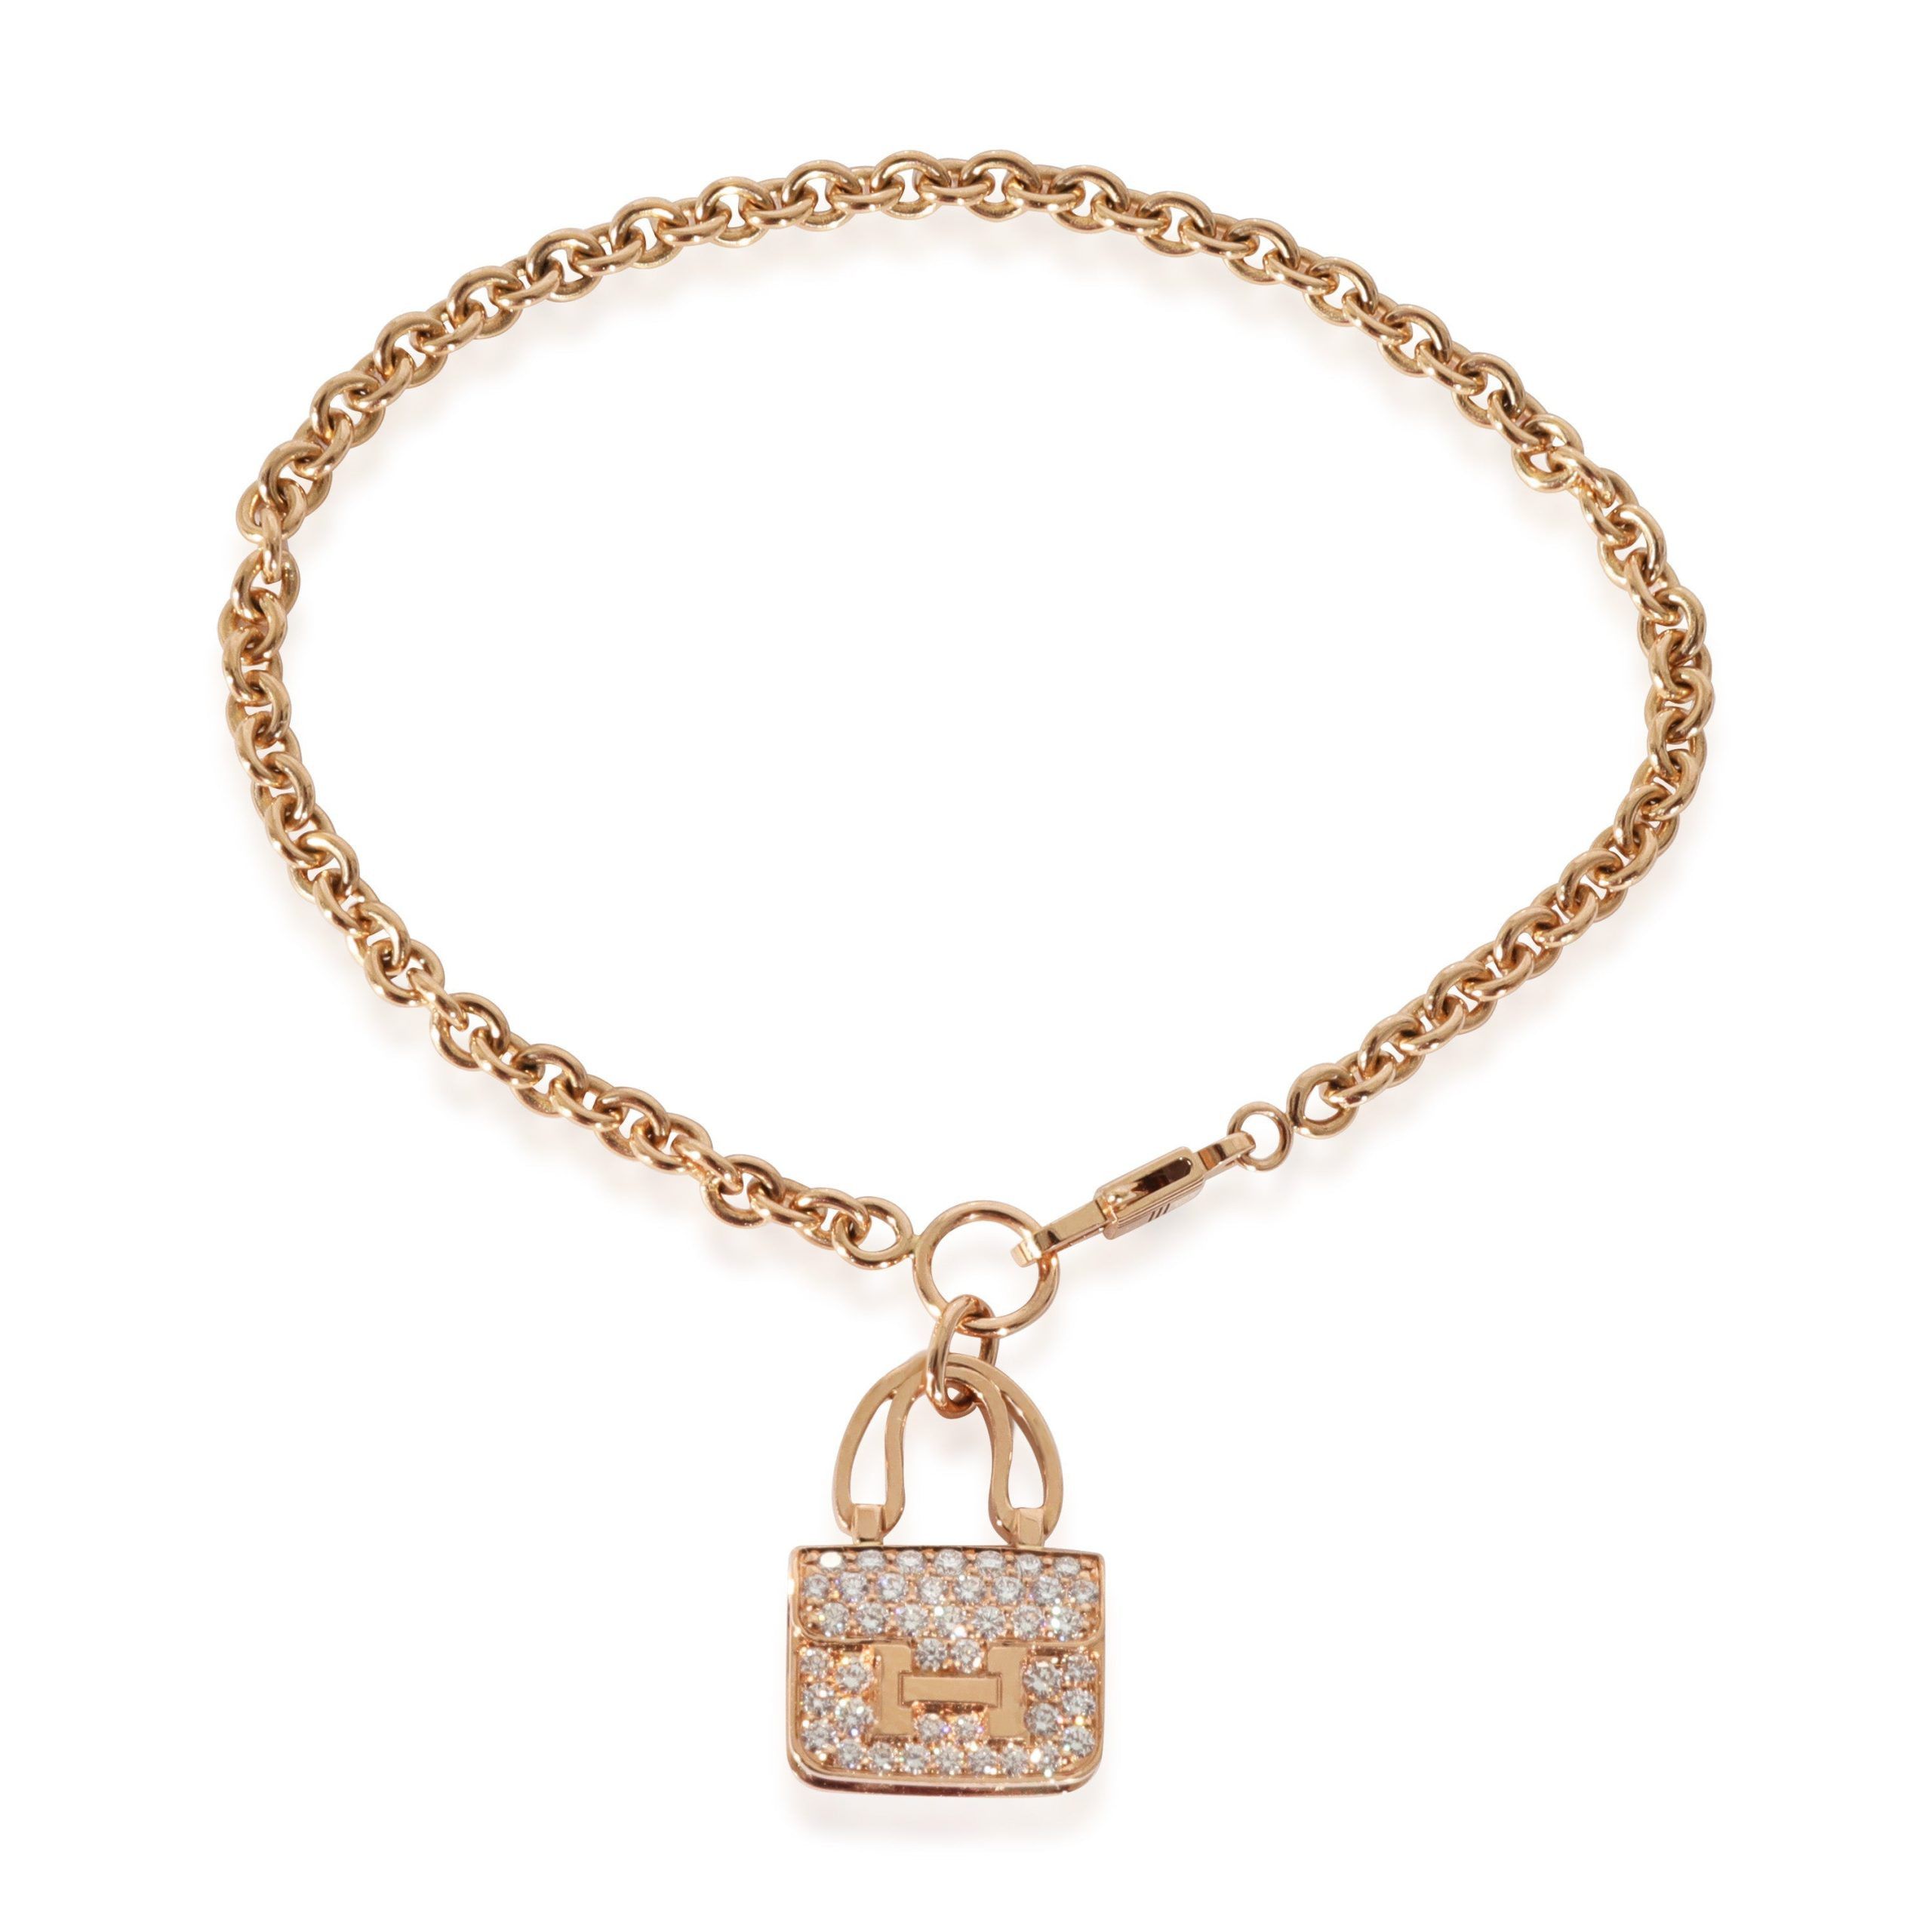 image of Hermes Amulettes Collection Constance Diamond Bracelet In 18K Rose Gold 0.44 Ctw, Women's